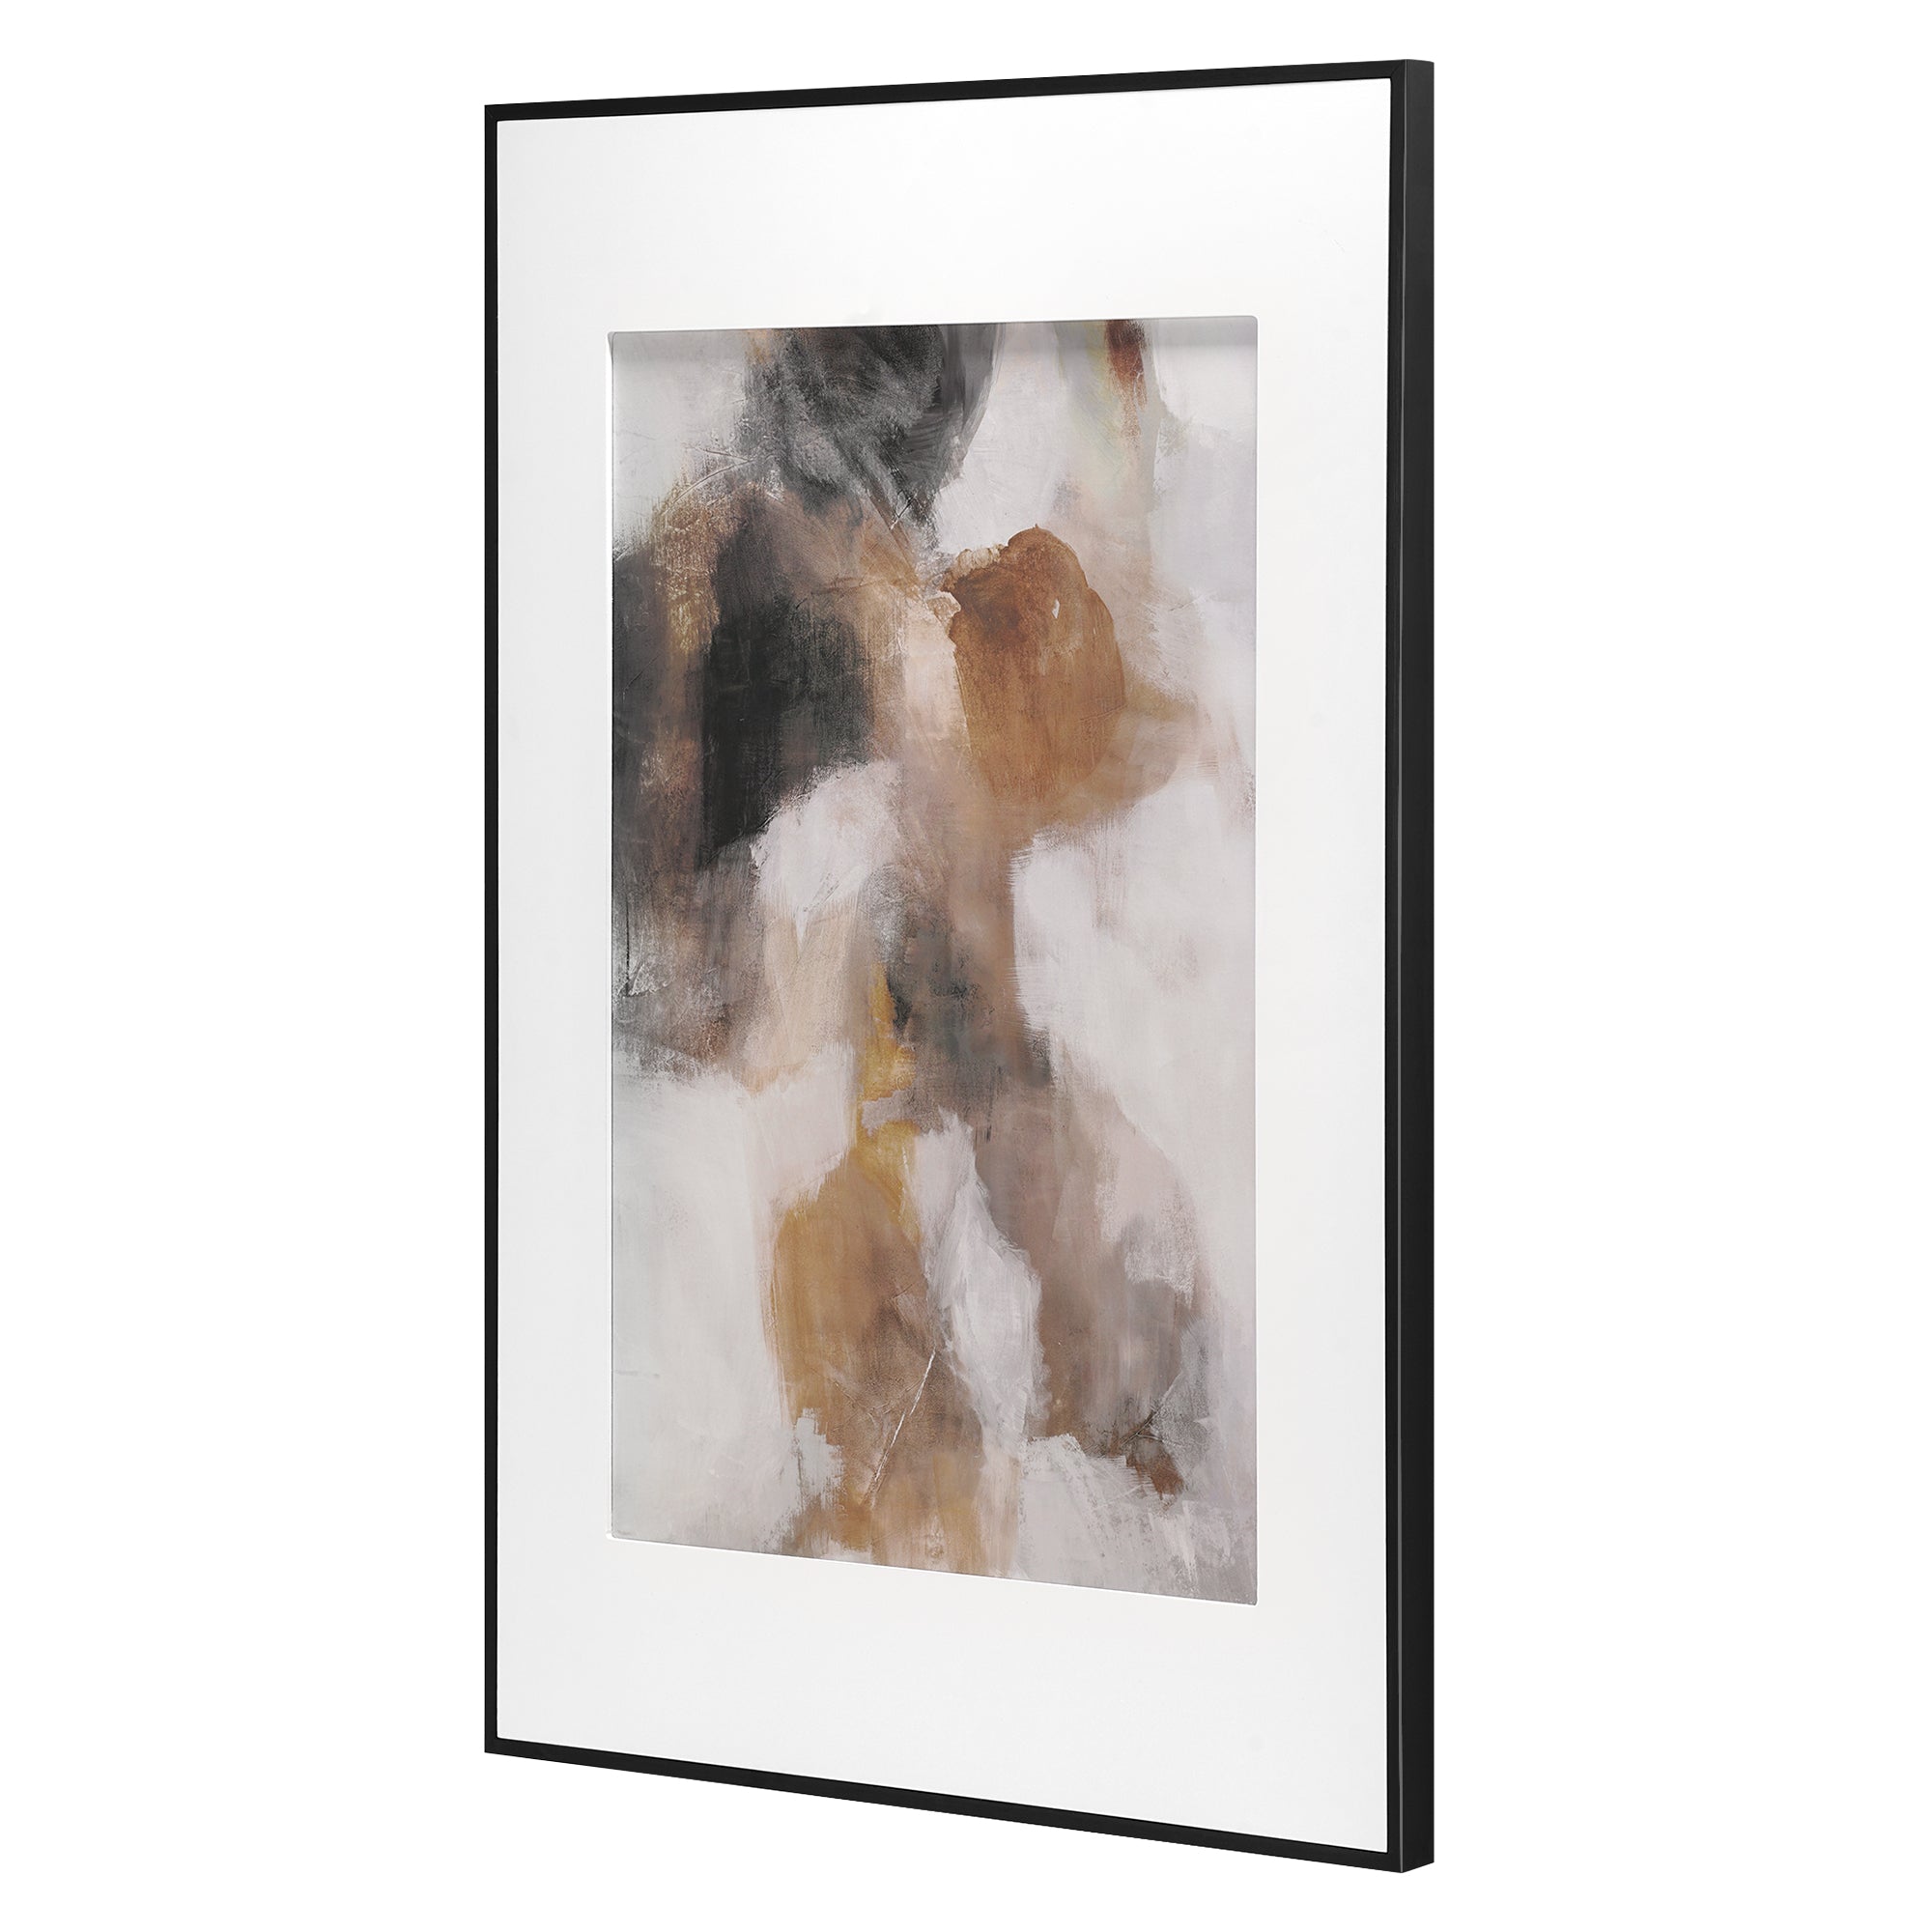 Echoes of Painted Canyons Framed Abstract Watercolor